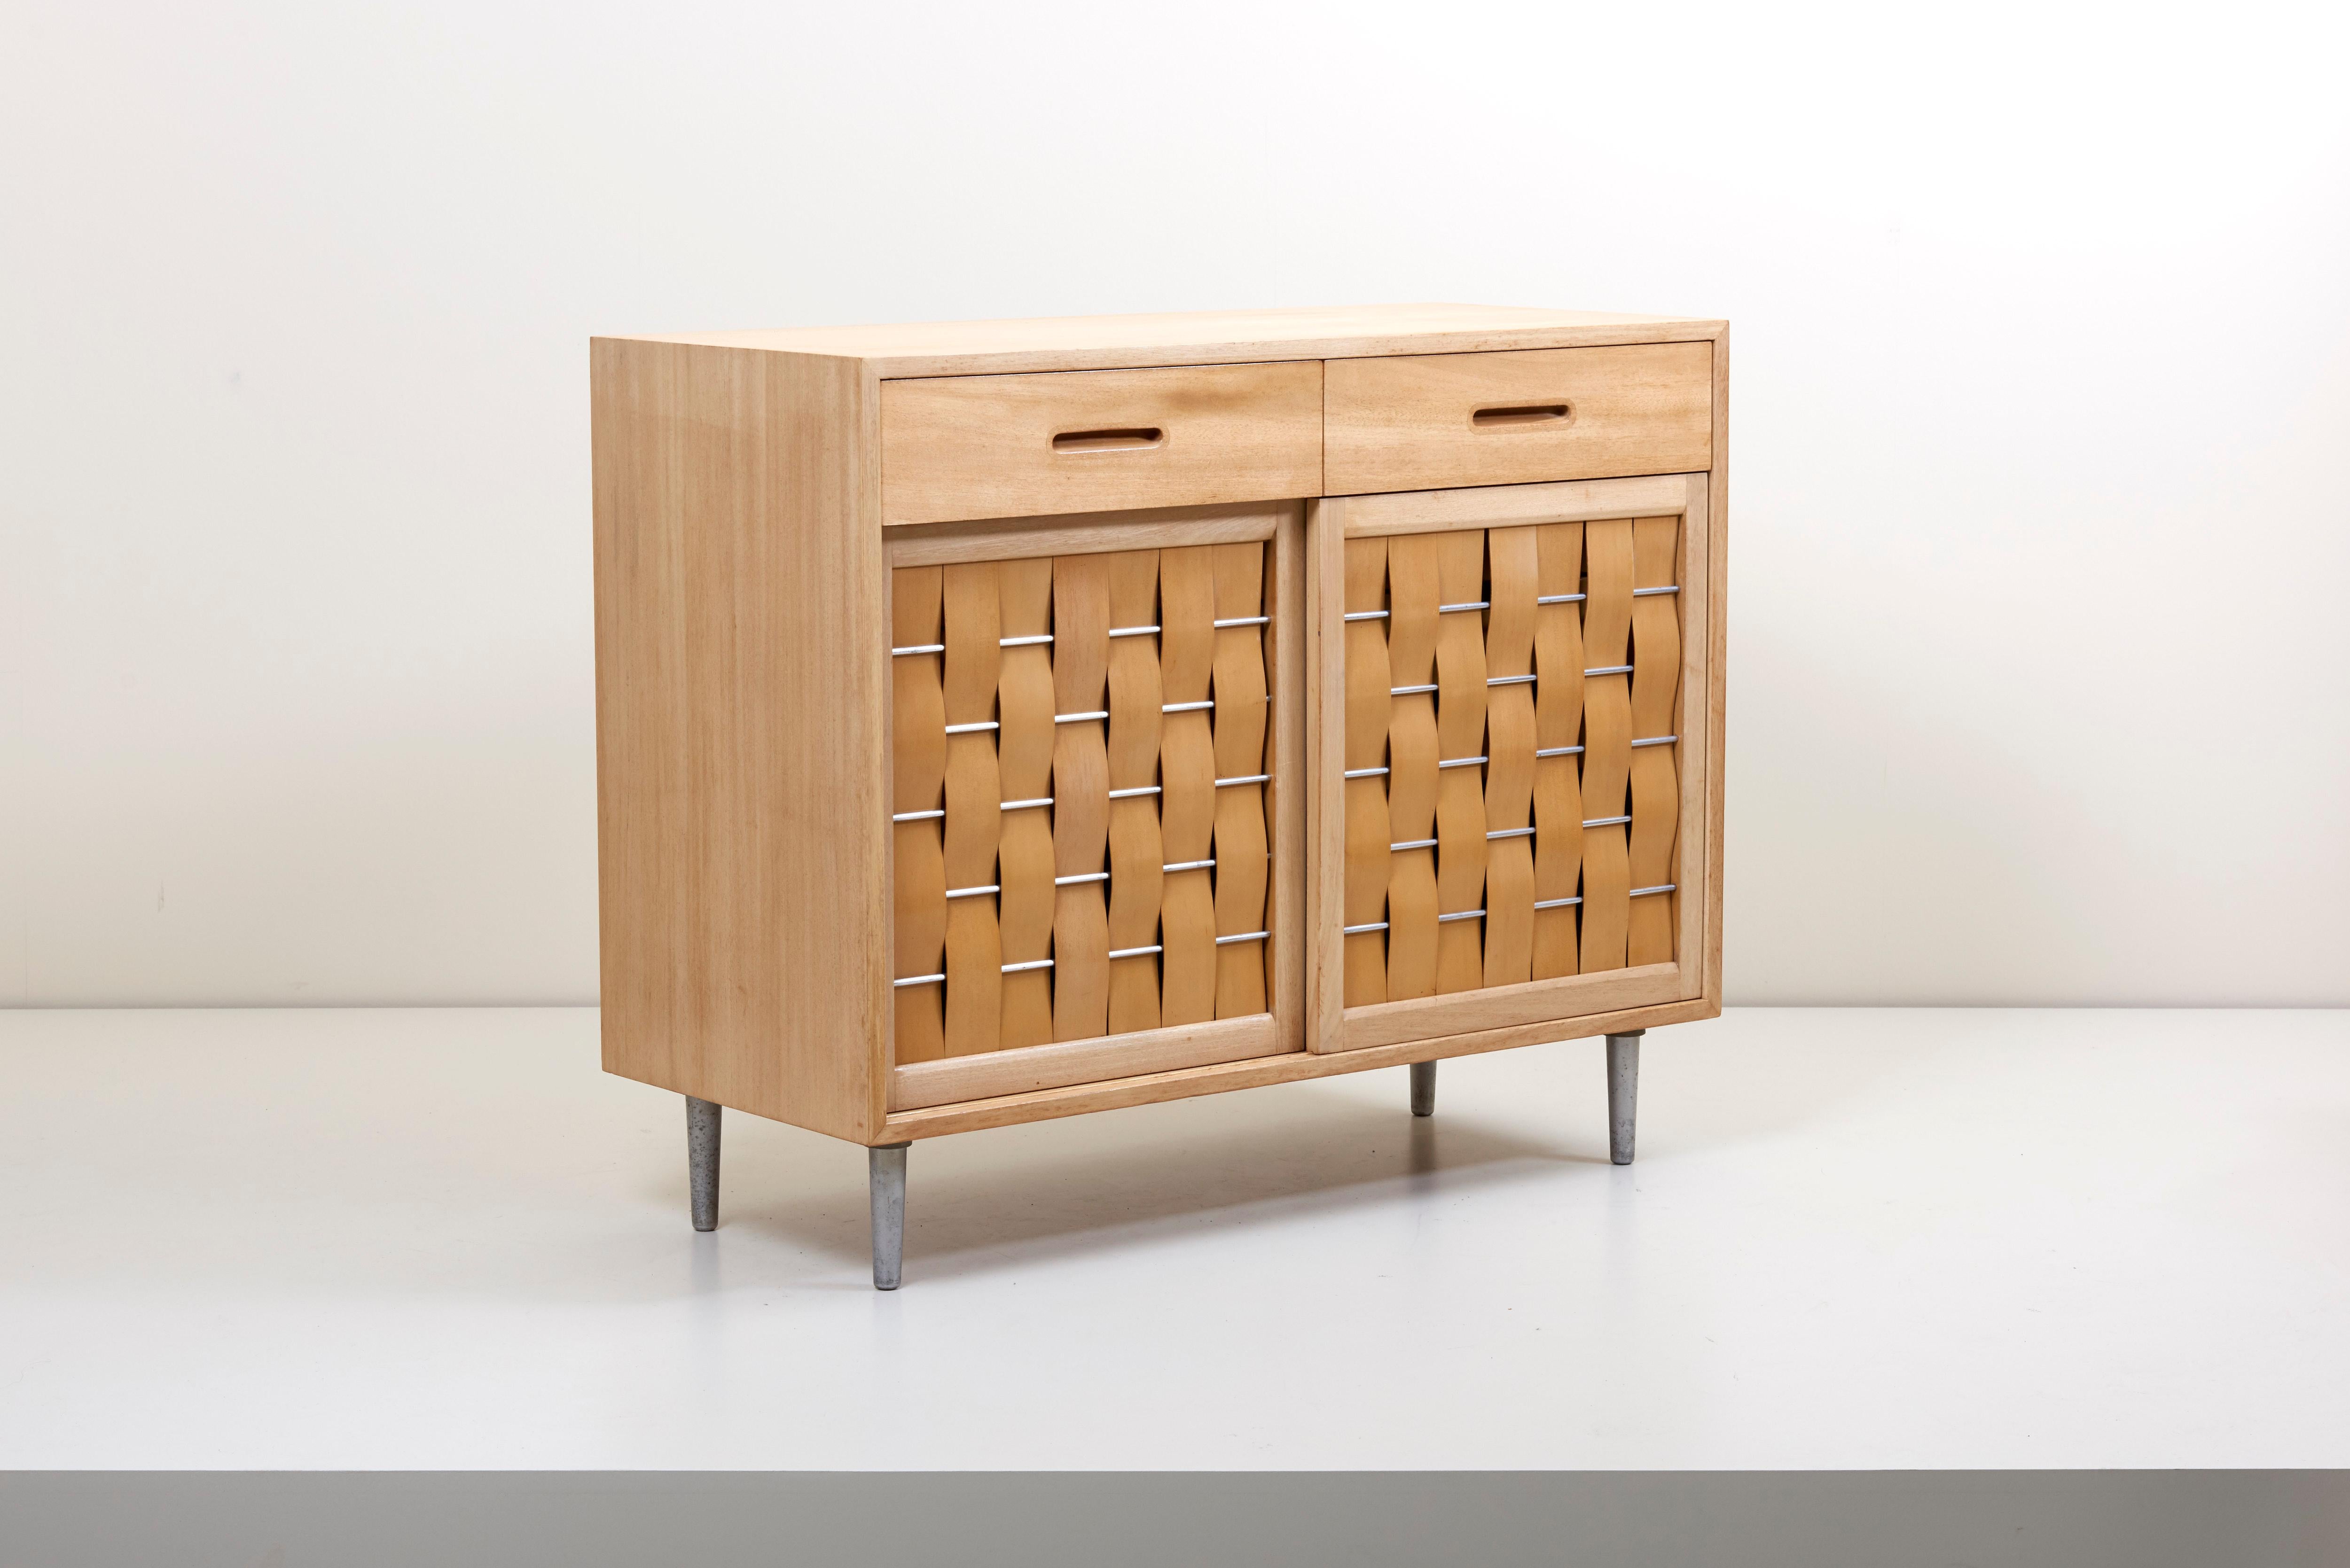 Elegant design by Edward Wormley for Dunbar Furniture Company, Berne Indiana. Perfectly refinished case with two top drawers and sliding woven front doors on metal legs. Fitted interior comprises six drawers.